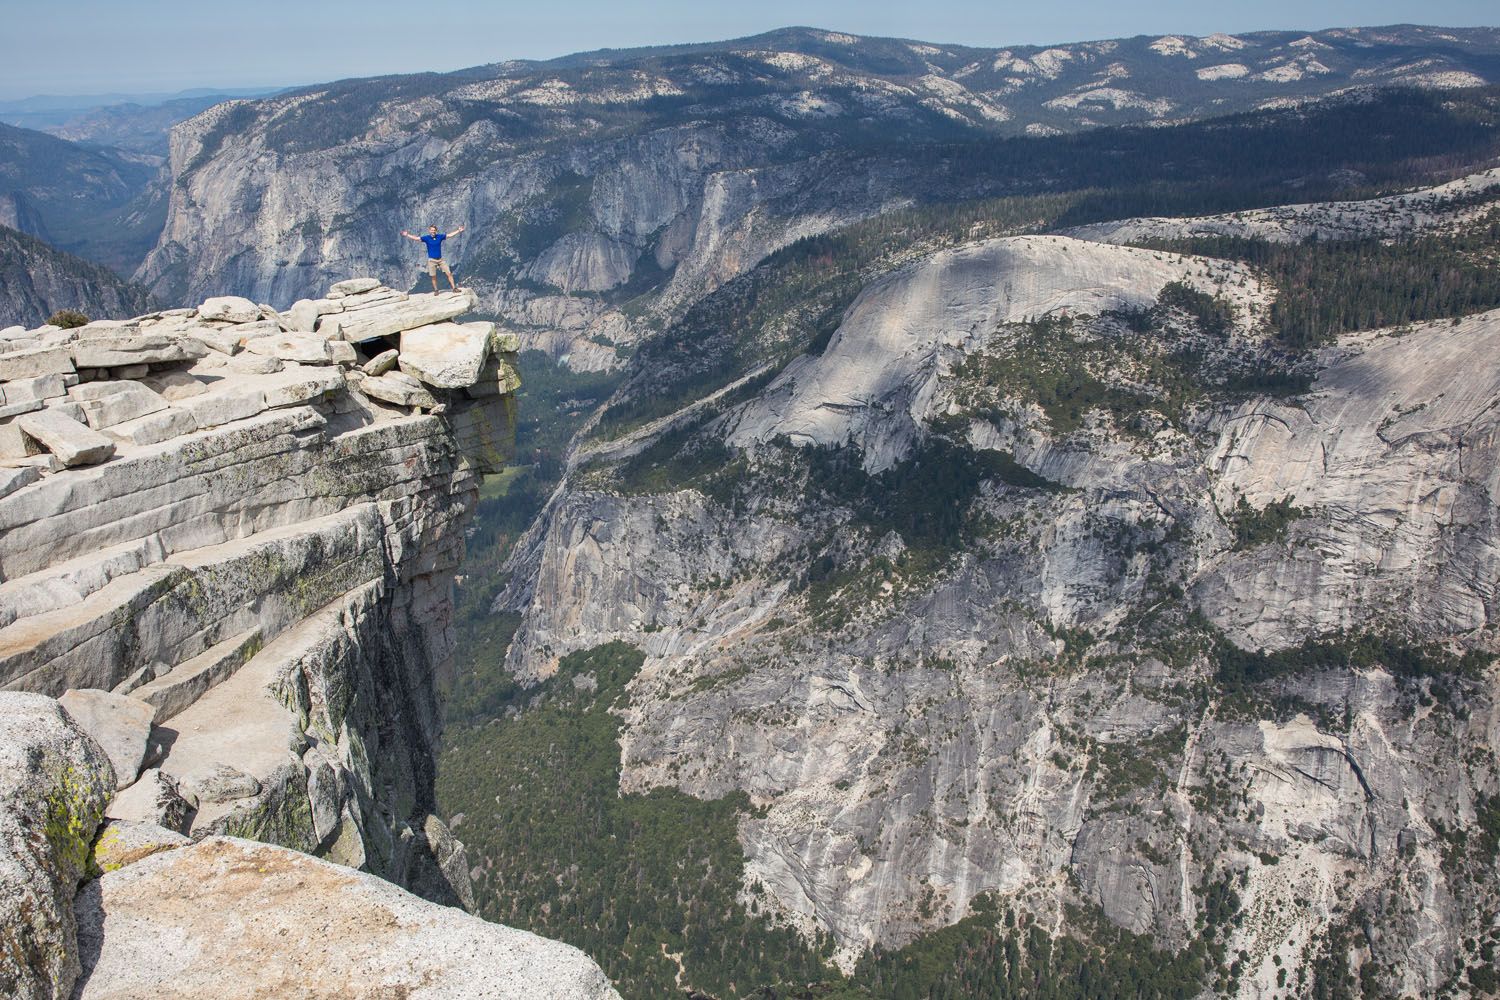 Standing on Top of Half Dome